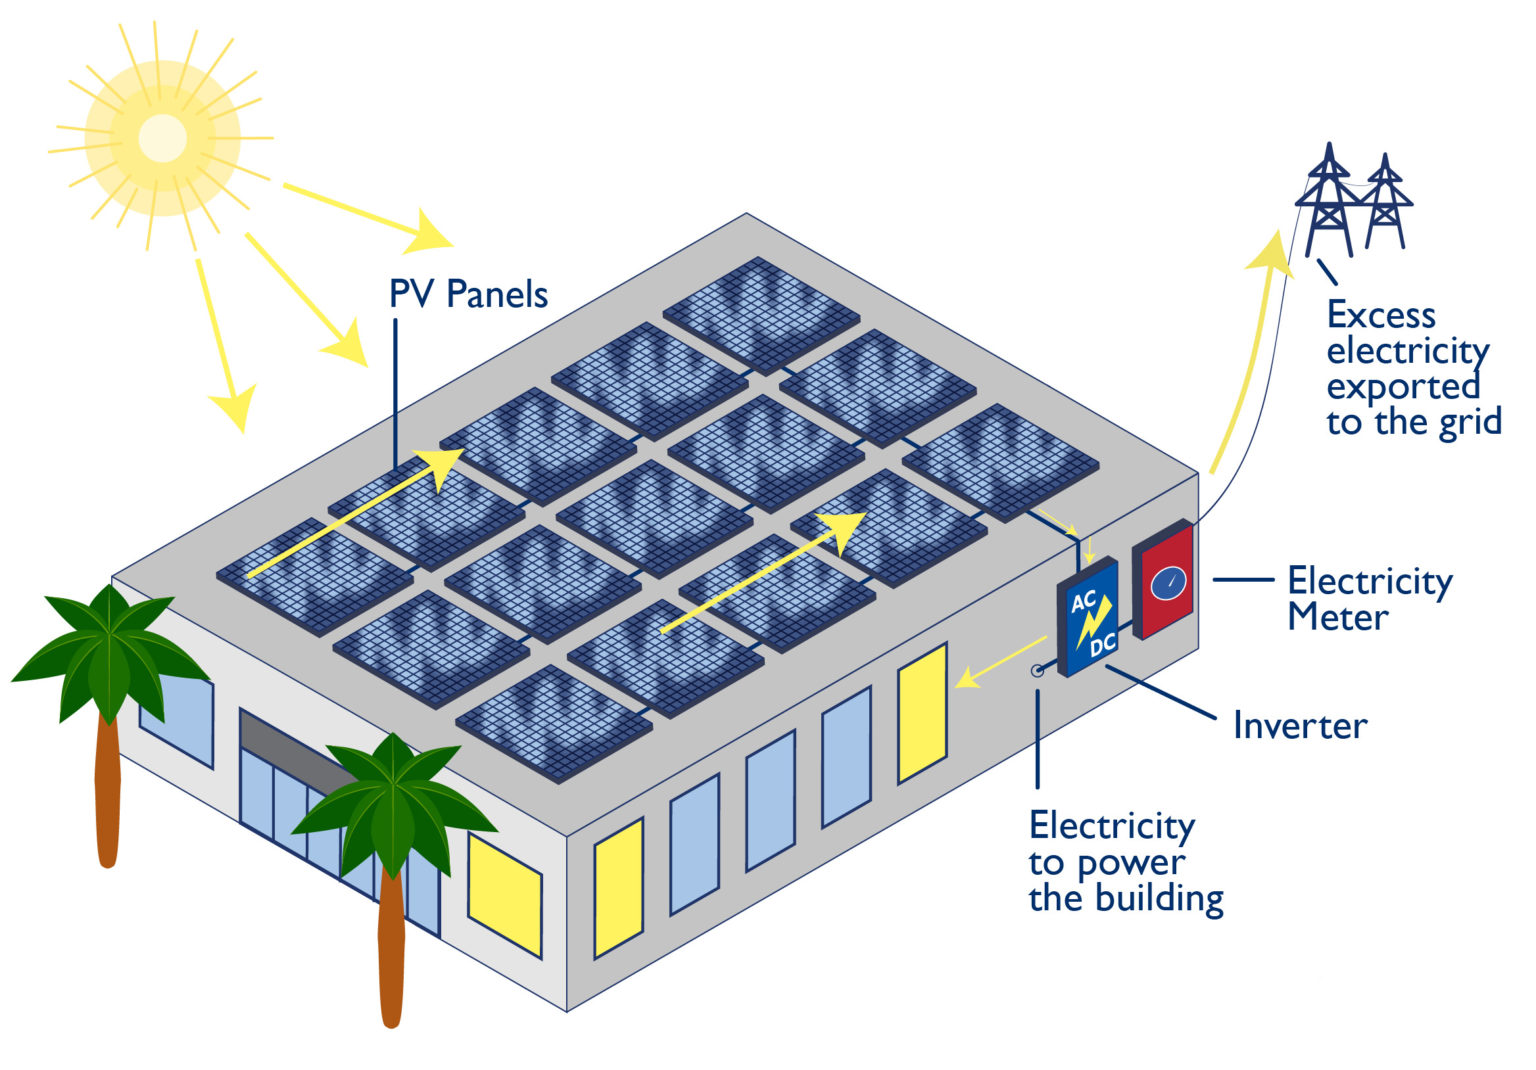 PV cells convert the sun’s energy into direct current (DC) electricity. DC electricity is sent to an inverter that converts it into alternating current (AC) electricity, which can be used on site or sent to the grid. 